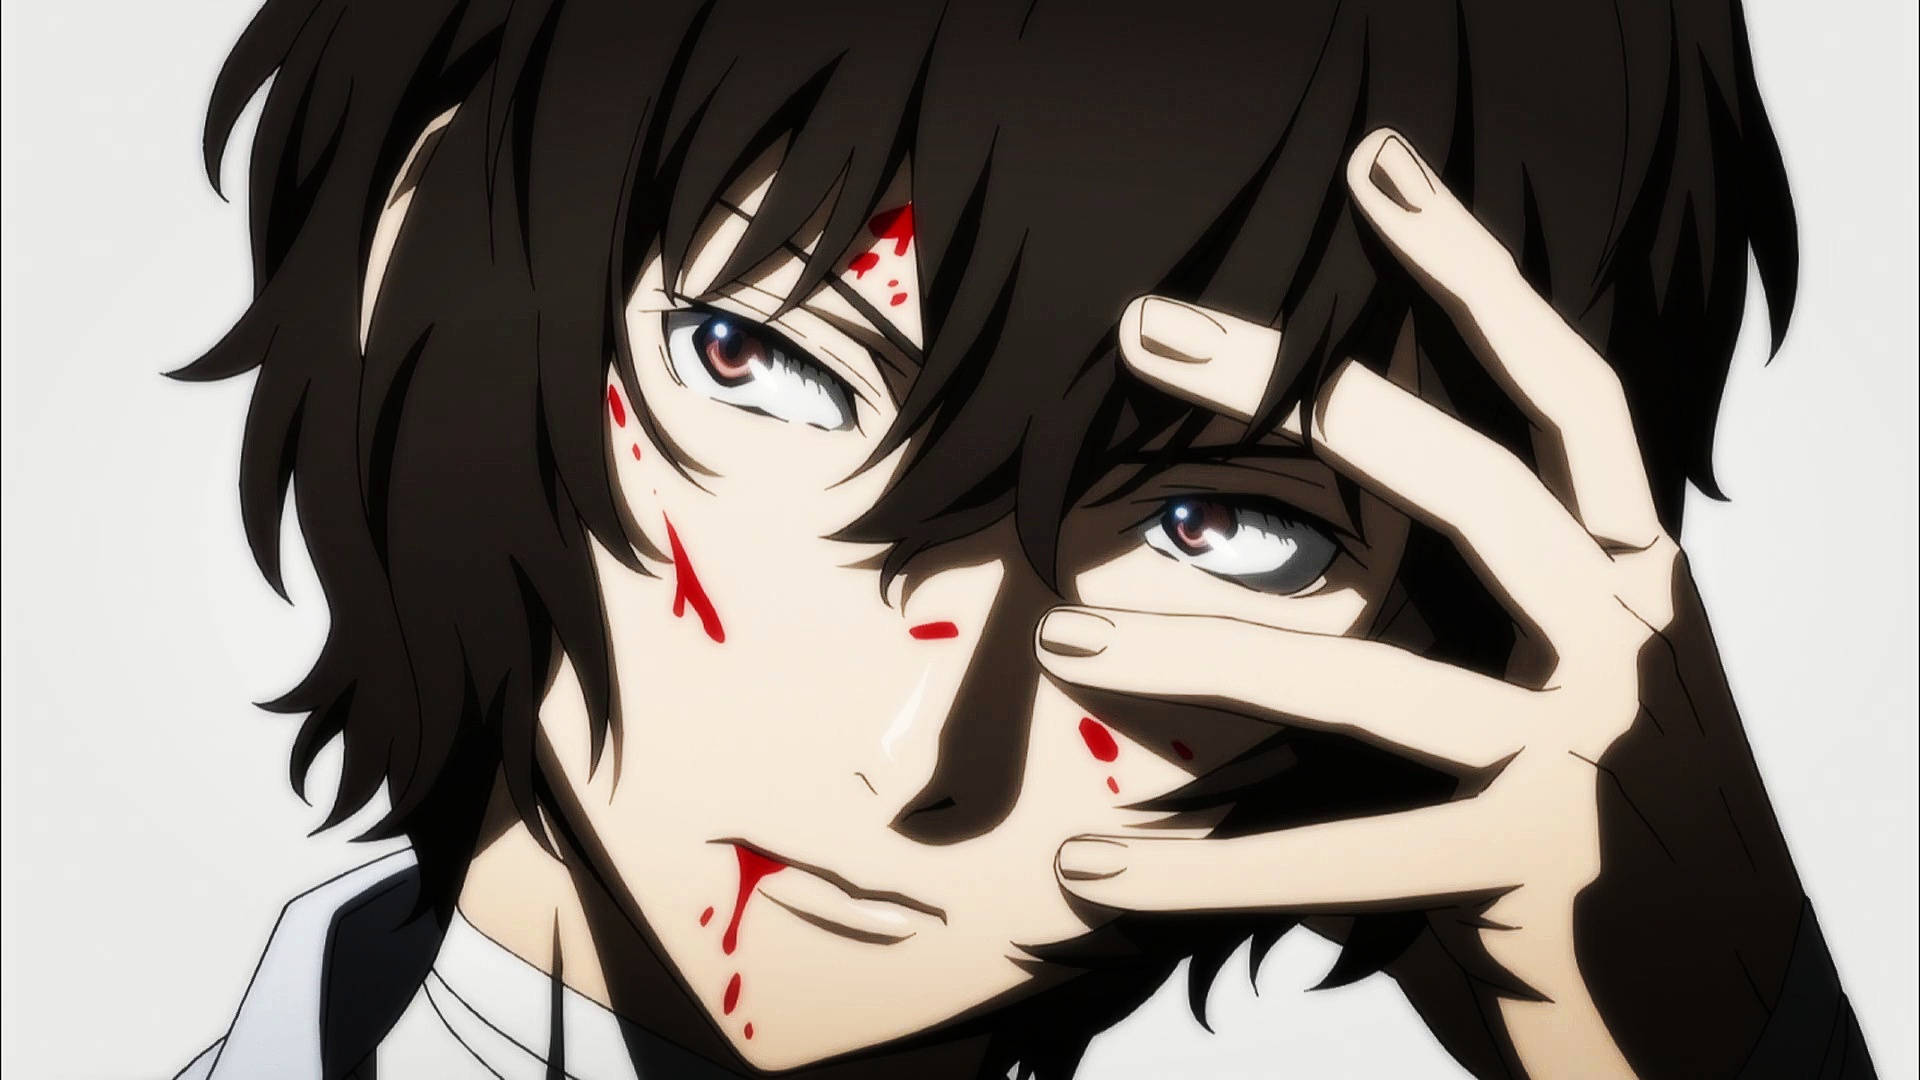 A Gripping Image of Dazai in Action Wallpaper